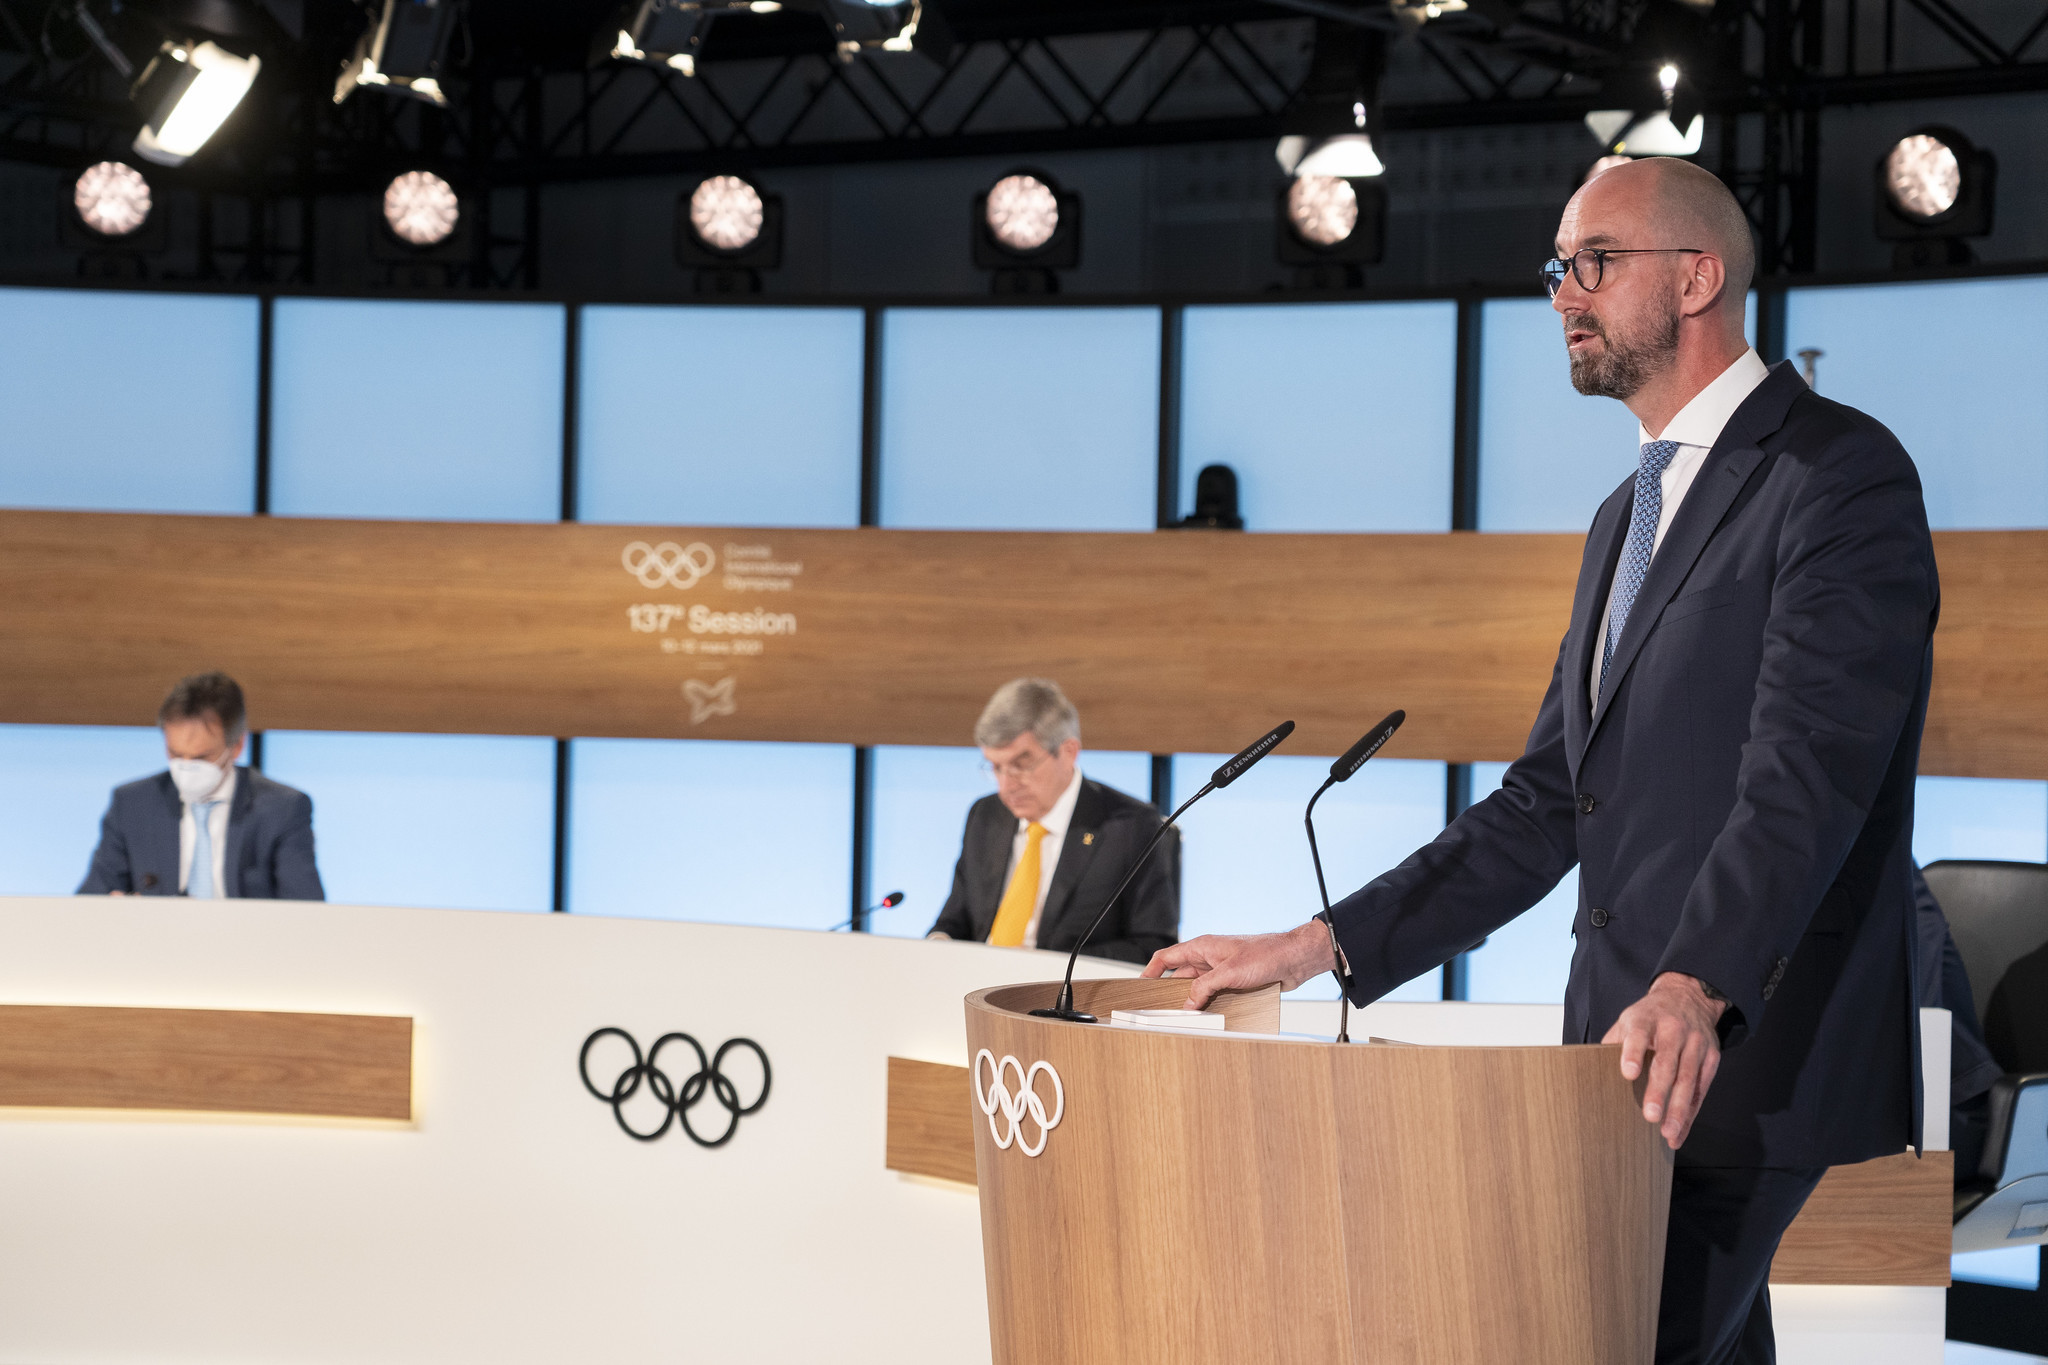 An update was provided on the Refugee Olympic Team prior to Tokyo 2020 ©IOC